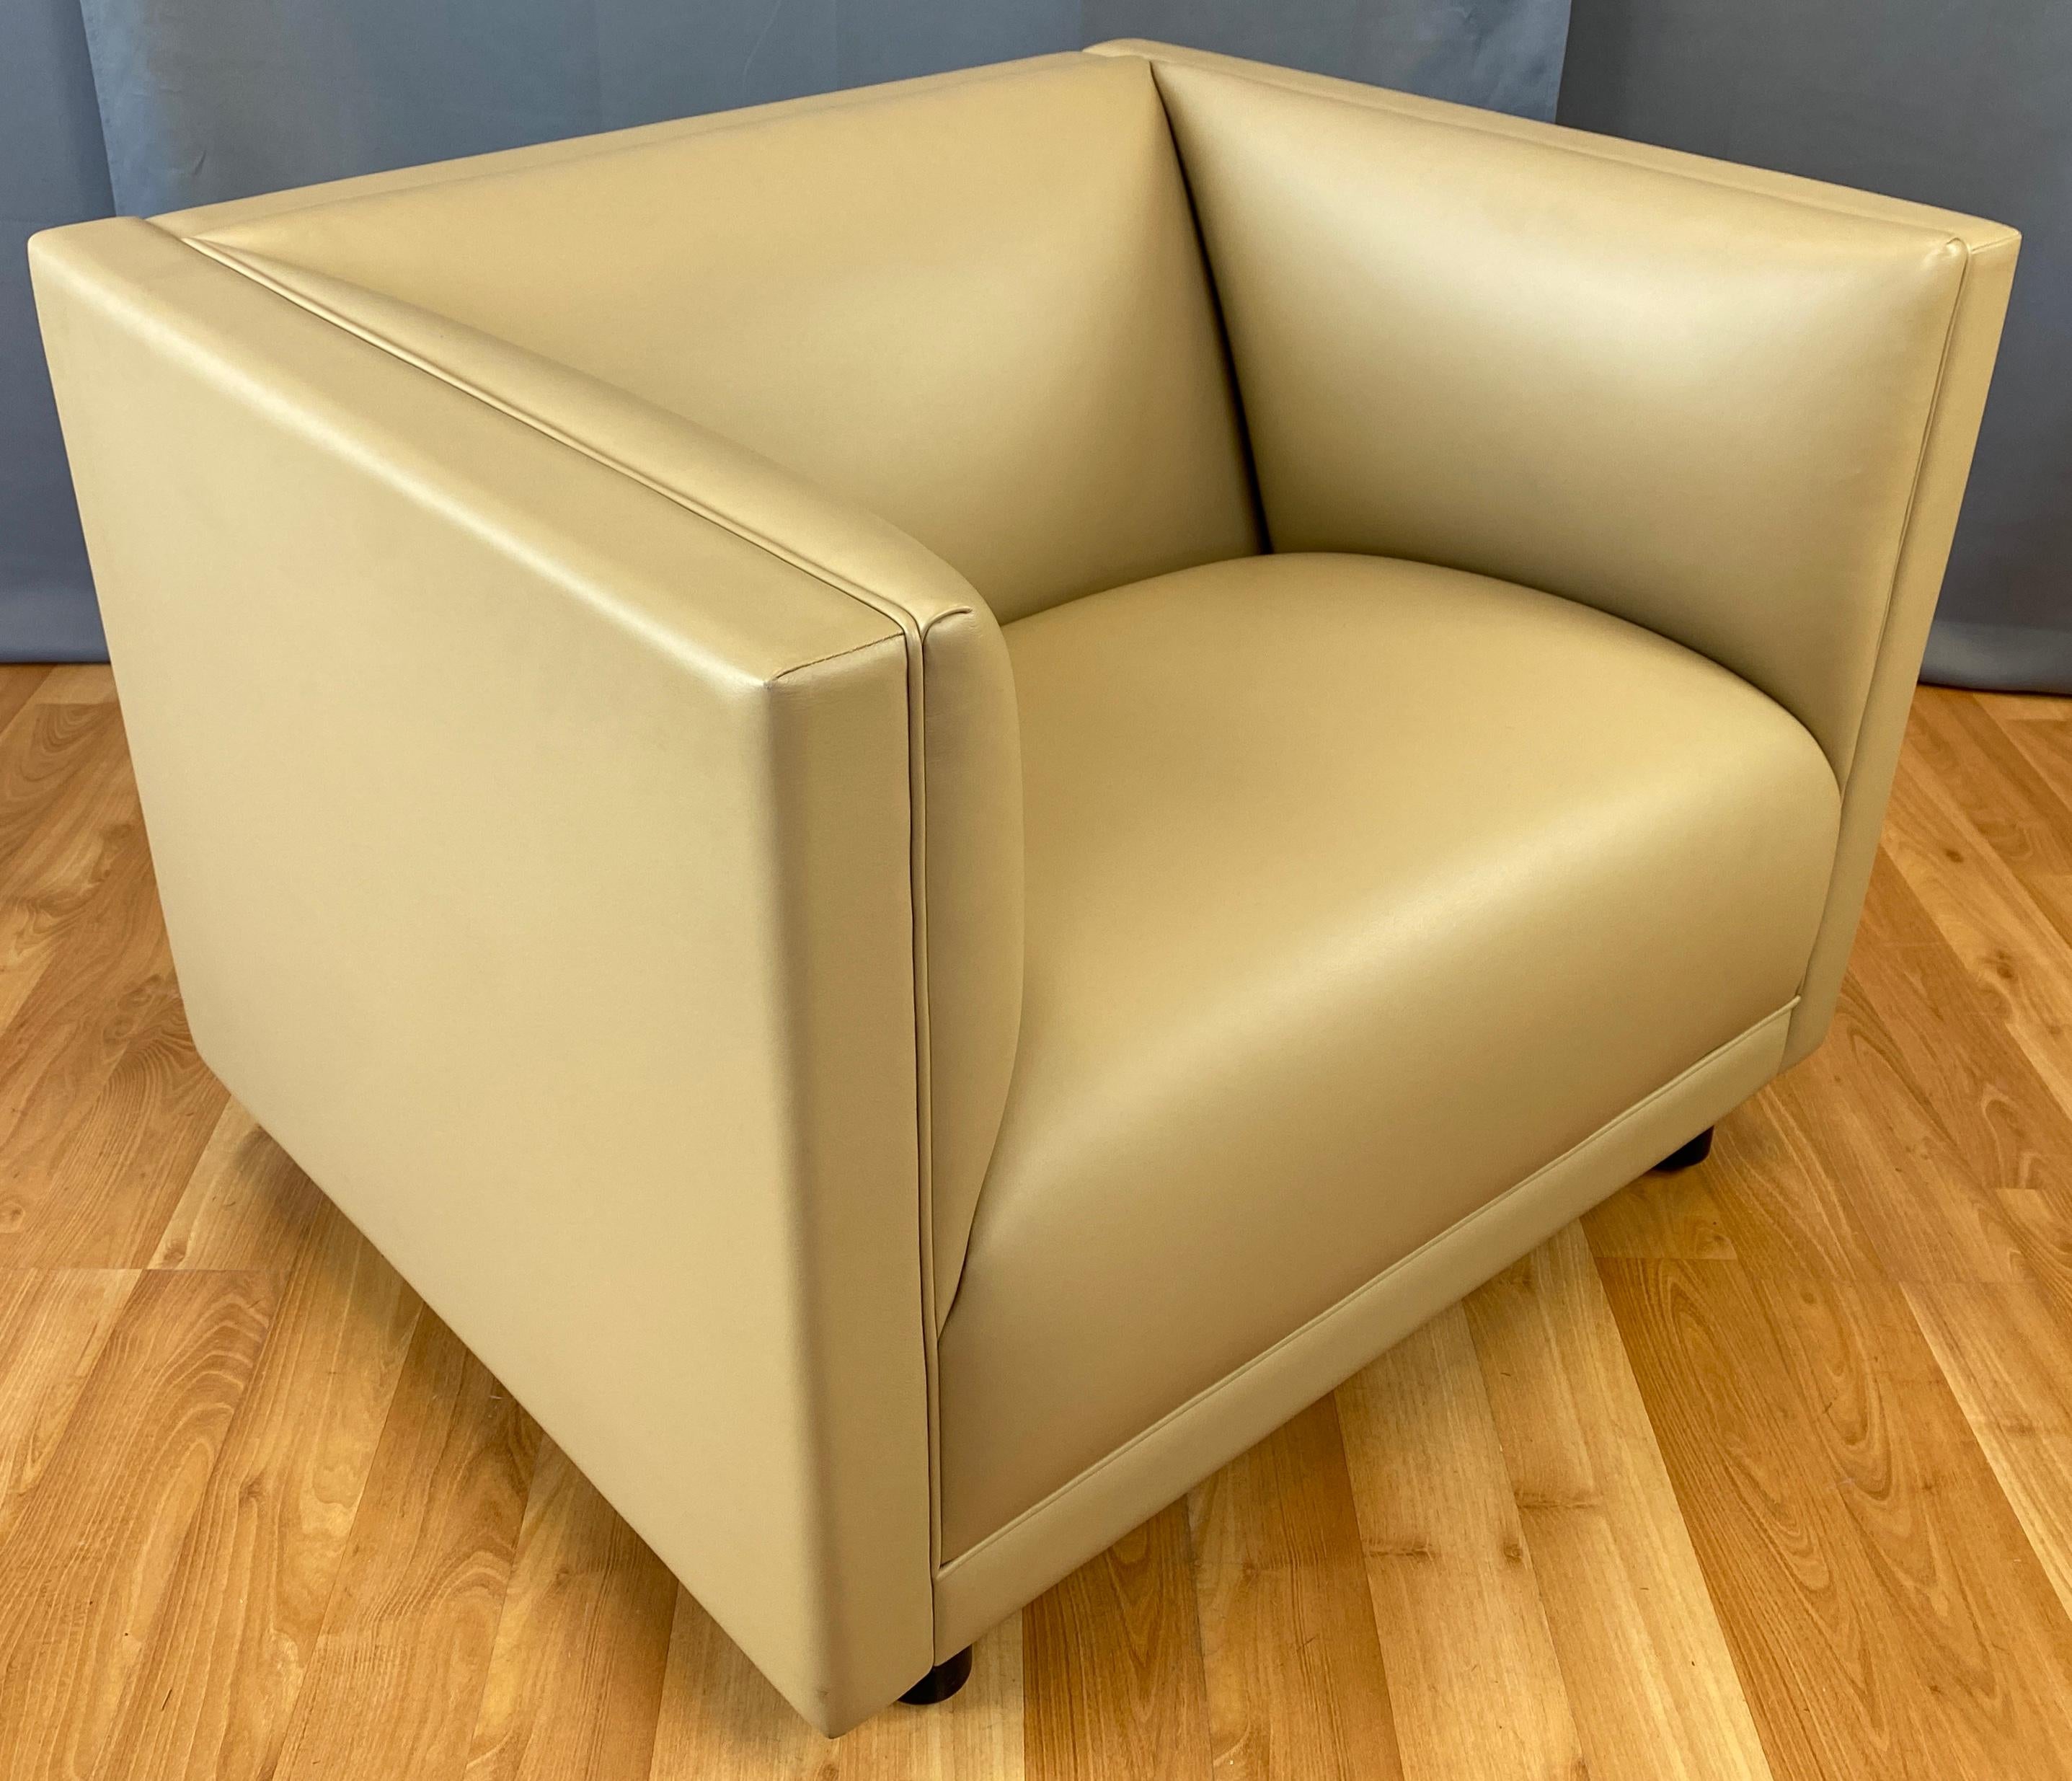 Contemporary Rolled Arm Club Chair Ward Bennett for Geiger, a Herman Miller Company For Sale